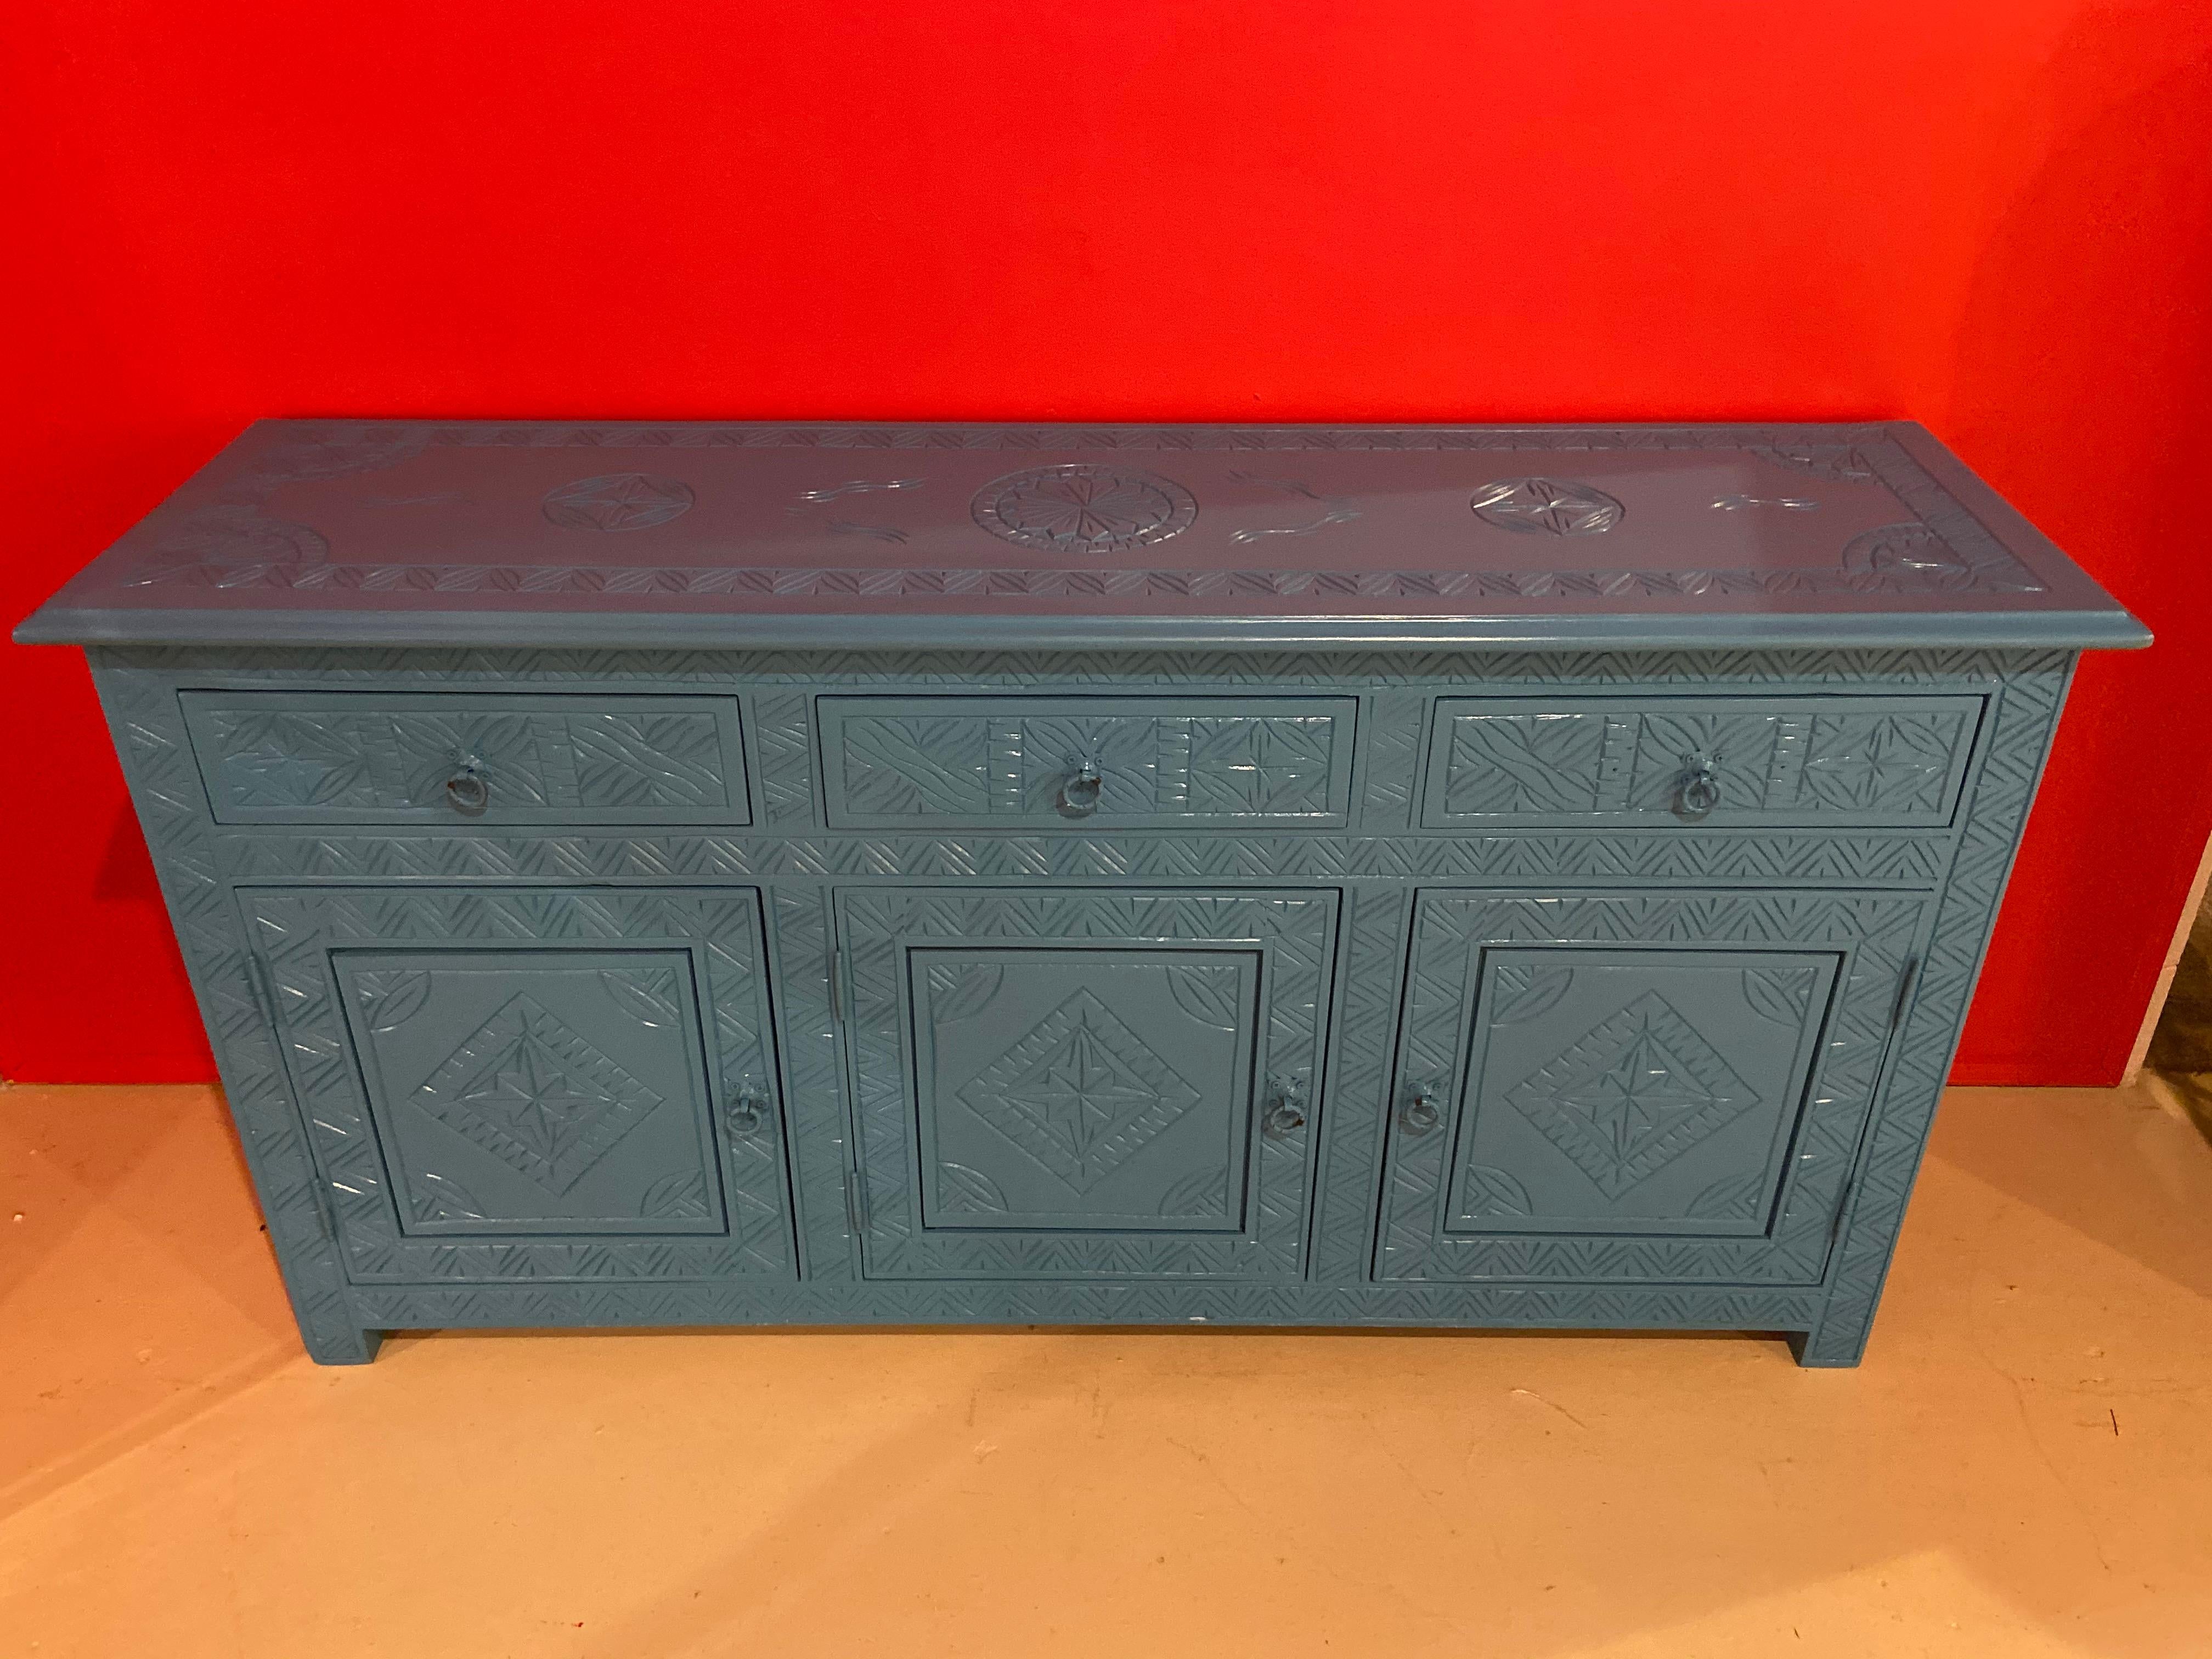 A true exemplary work of hand carved wood work, this modern Moroccan beautiful celeste blue console is a perfect combination of style and usefulness. The dresser or console features three drawer over three doors, so plenty of storage. The celeste